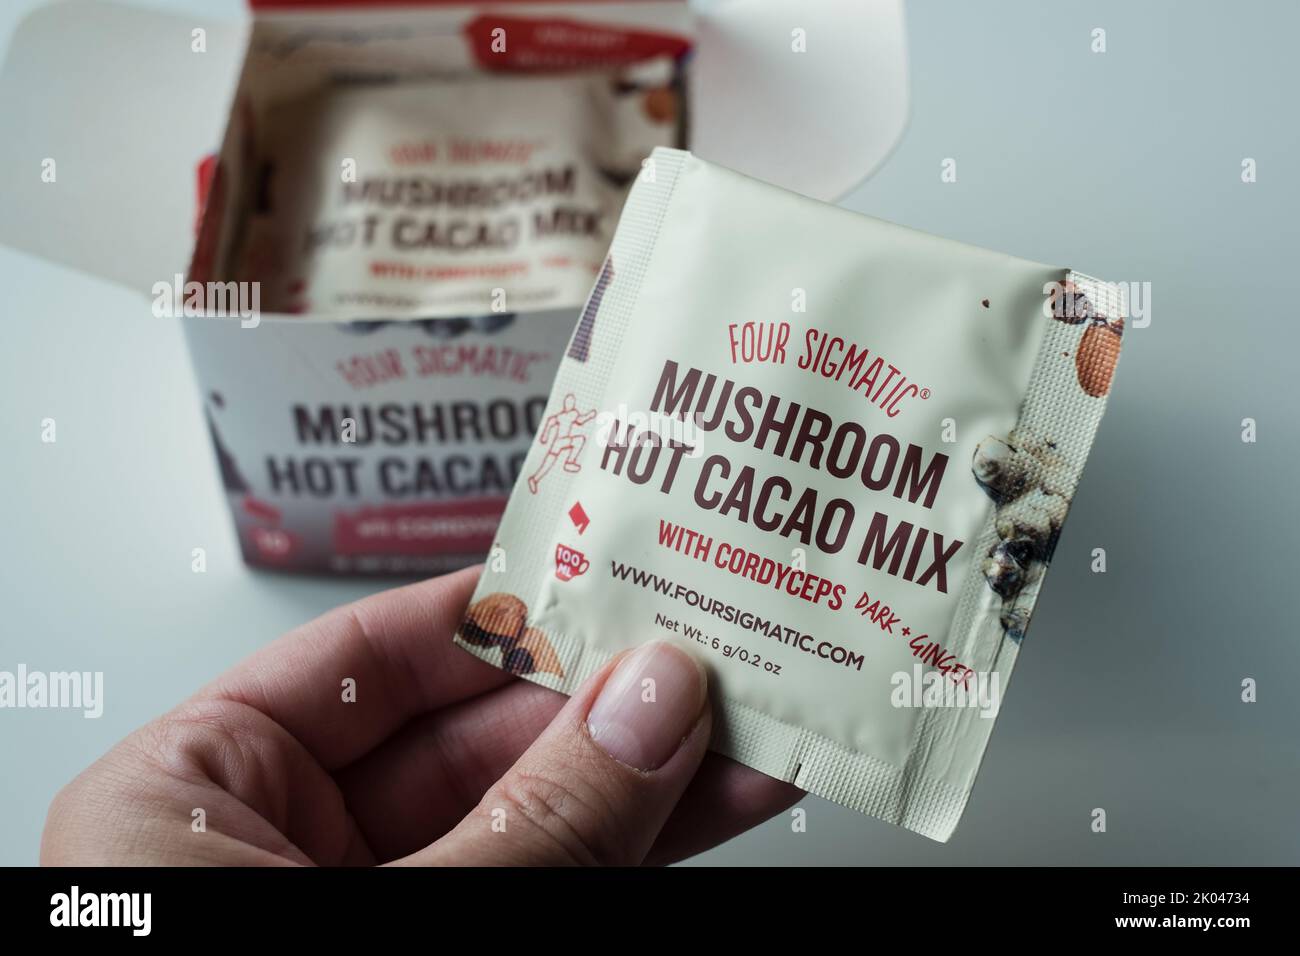 Helsinki, Finland - September 8, 2022: Four Sigmatic mushroom cacao mix pack. Four Sigmatic is functional foods company known for mushroom food. Stock Photo